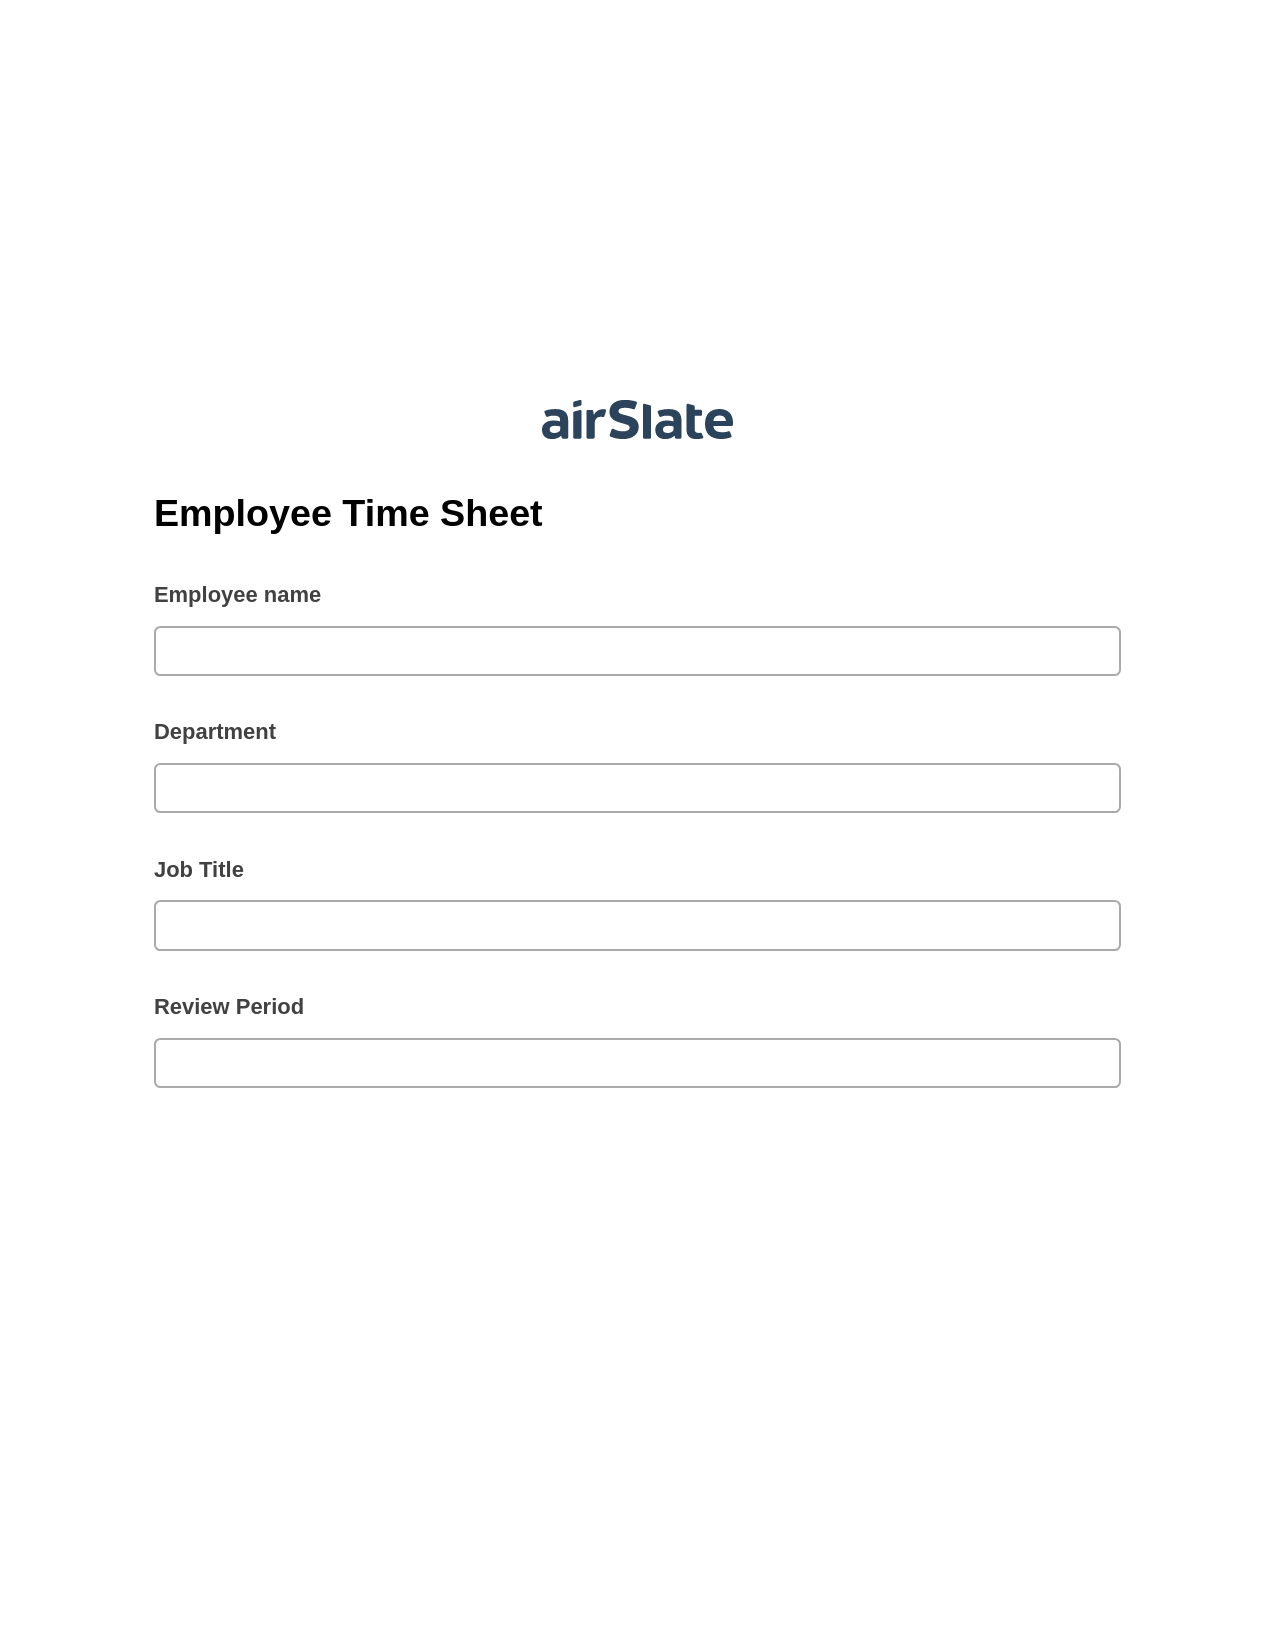 Multirole Employee Time Sheet Pre-fill from another Slate Bot, Create slate addon, Export to NetSuite Bot